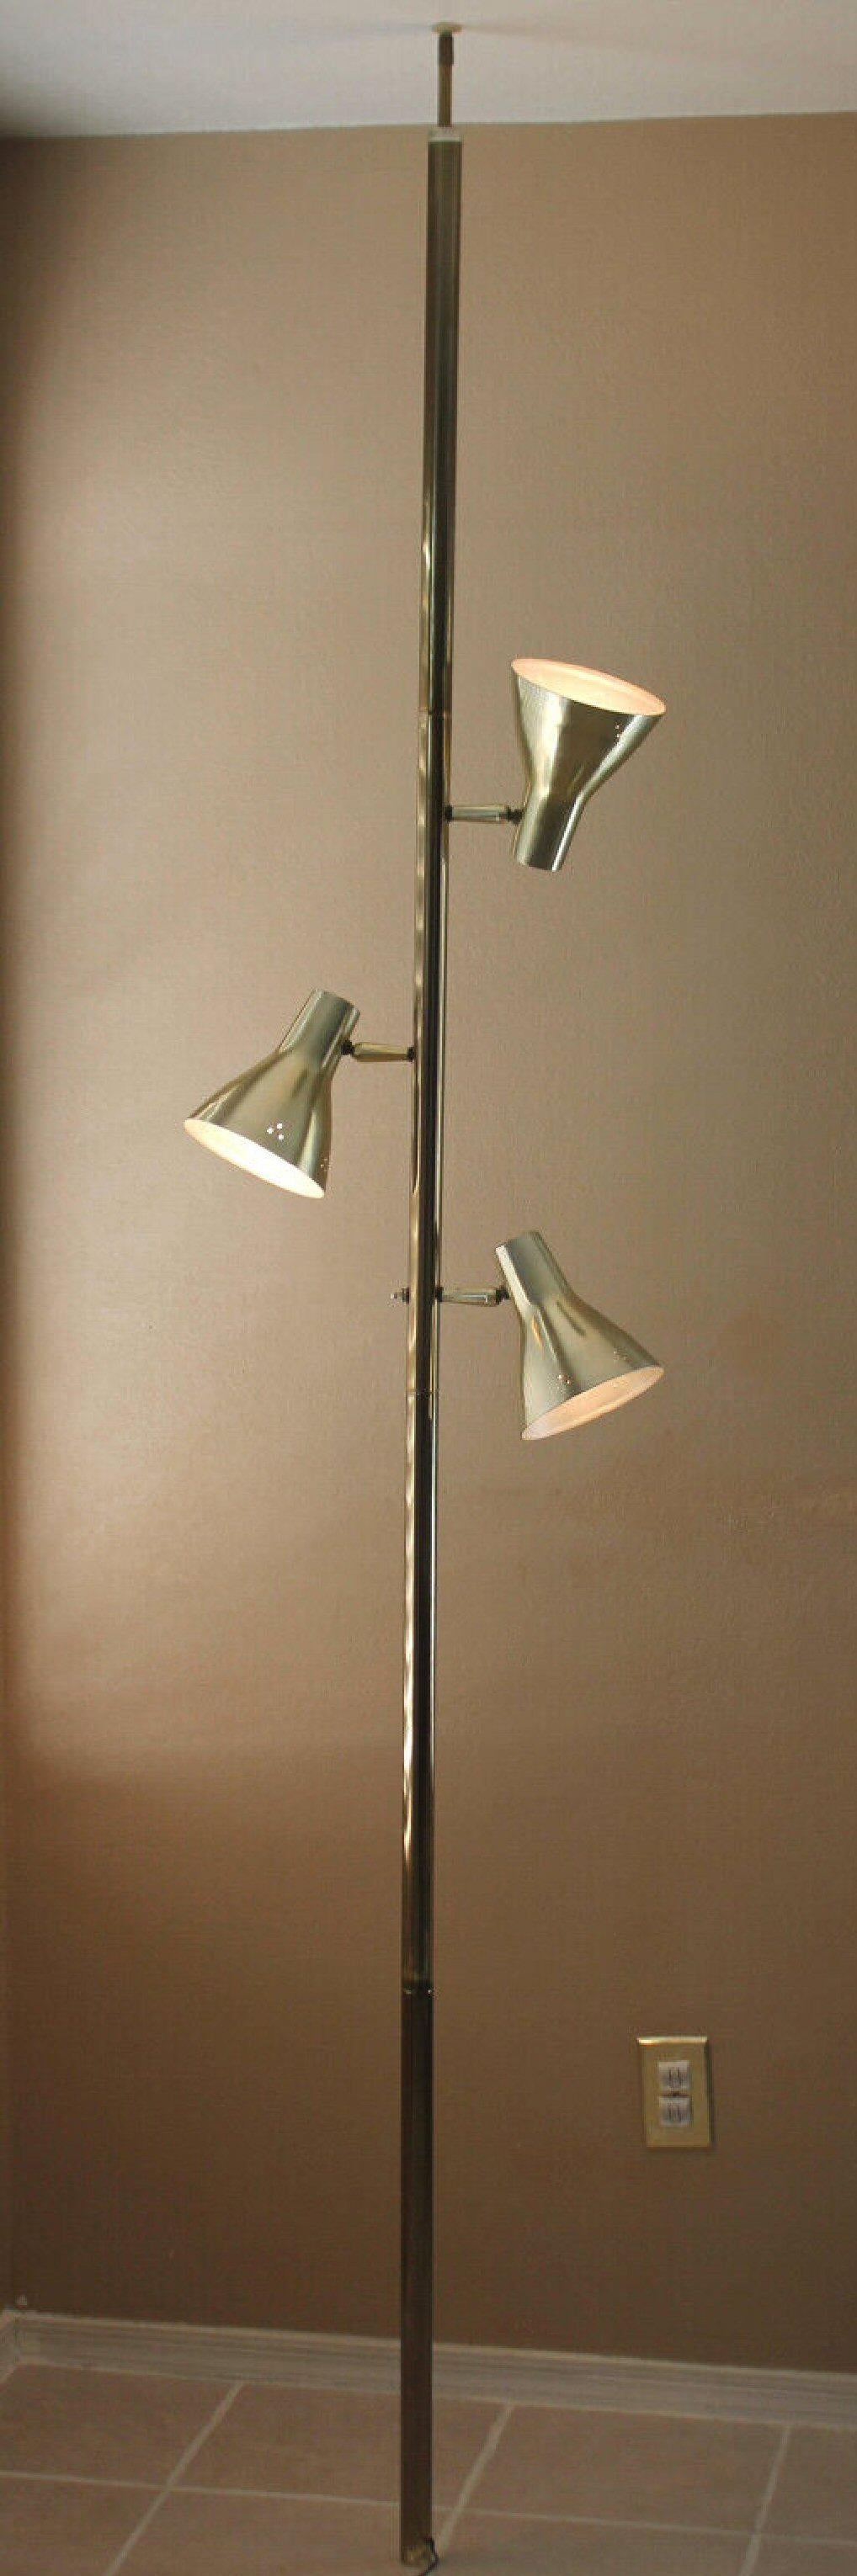 
CLASSIC!

ATOMIC AGE
MID CENTURY MODERN
ALUMINUM CONE SHADE
TENSION POLE LAMP!

GOOD DESIGN!
CIRCA 1959-60
(FITS 8 FT. CEILING)

Offered is another Magnificent Mid Century Tension Pole Lamp!
A super clean design in gold that blends ergonomics
with